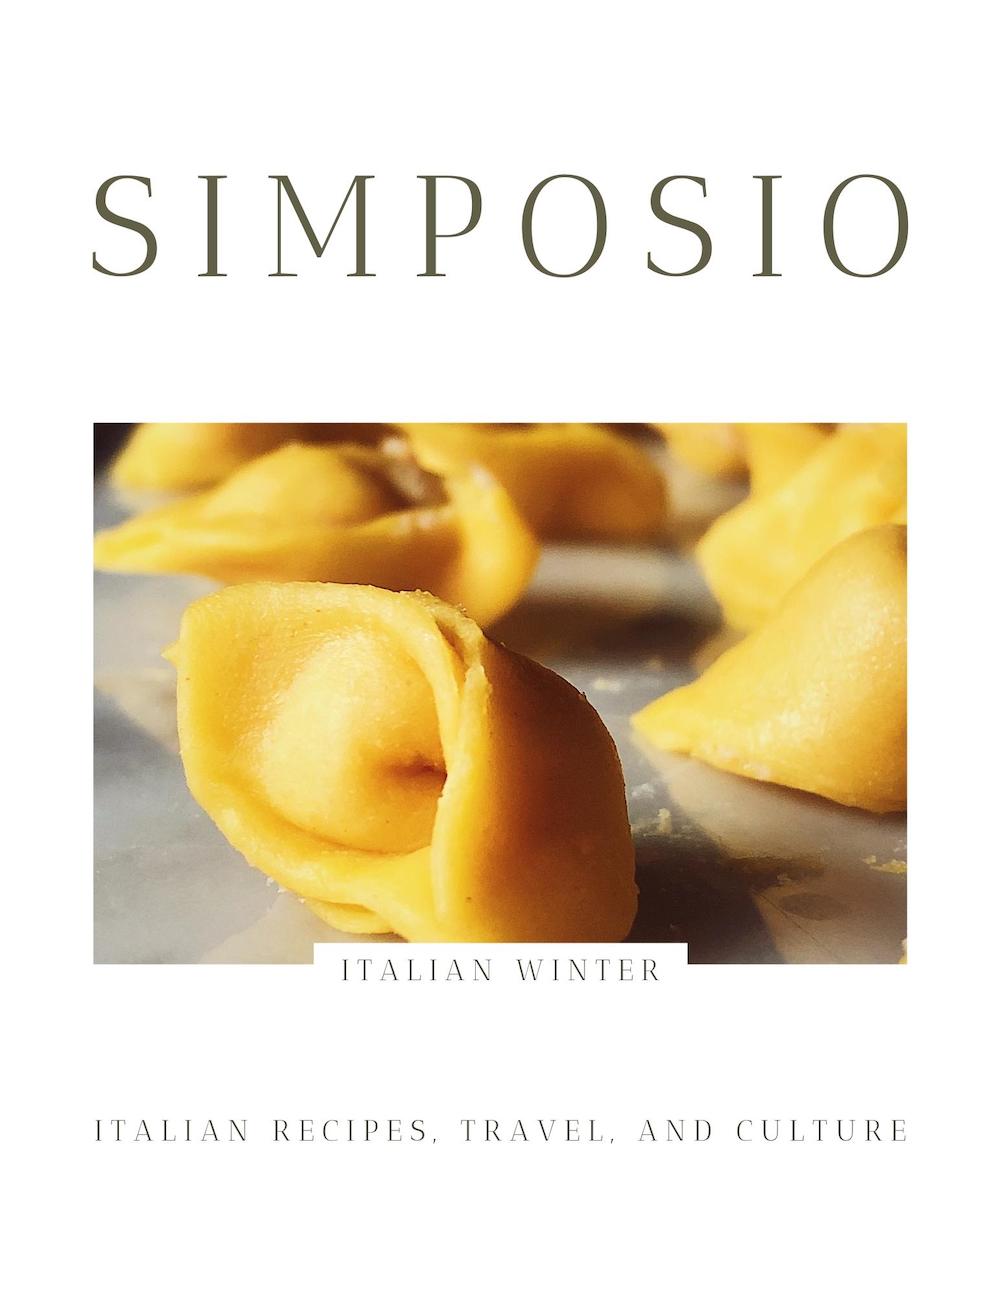 cover of the Modena cookbook from the Italian series of Simposio